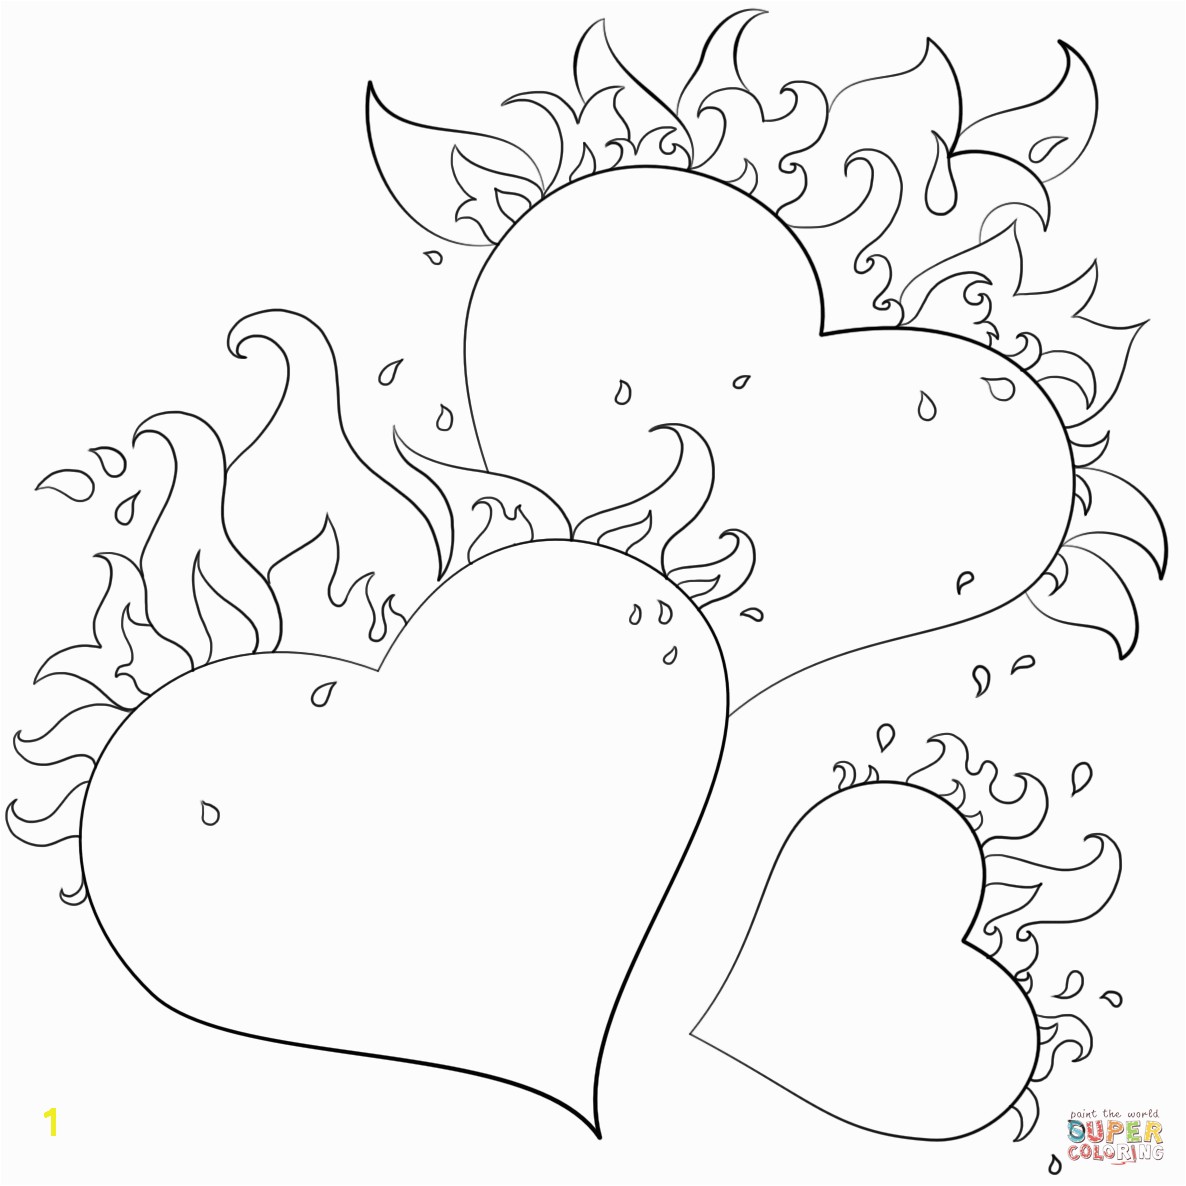 Hearts With Flames Coloring Page With Flame Coloring Page